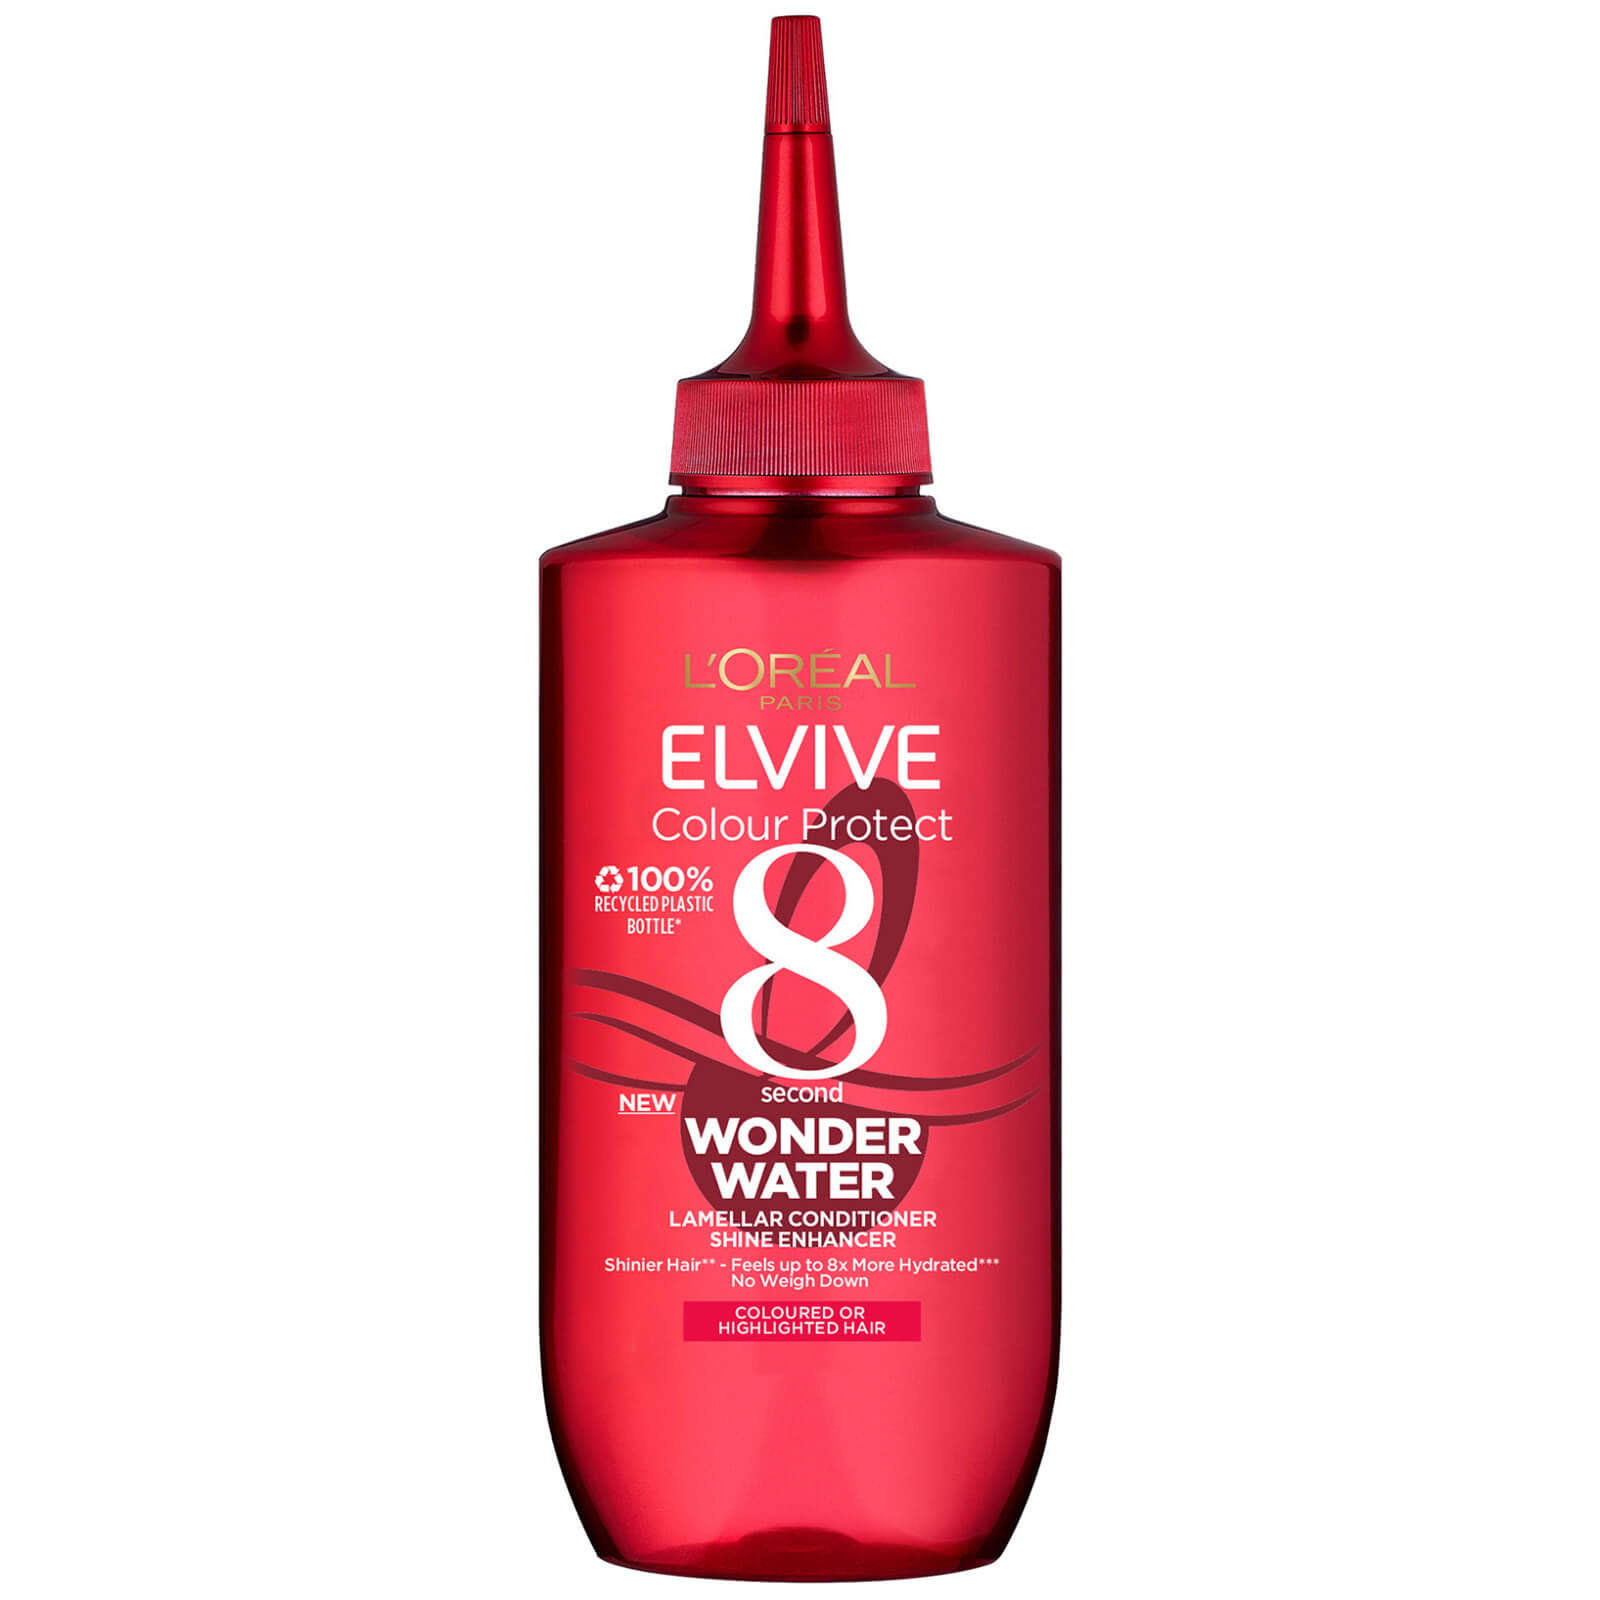 L'Oreal Elvive Colour Protect 8 Second Wonder Water 200ml